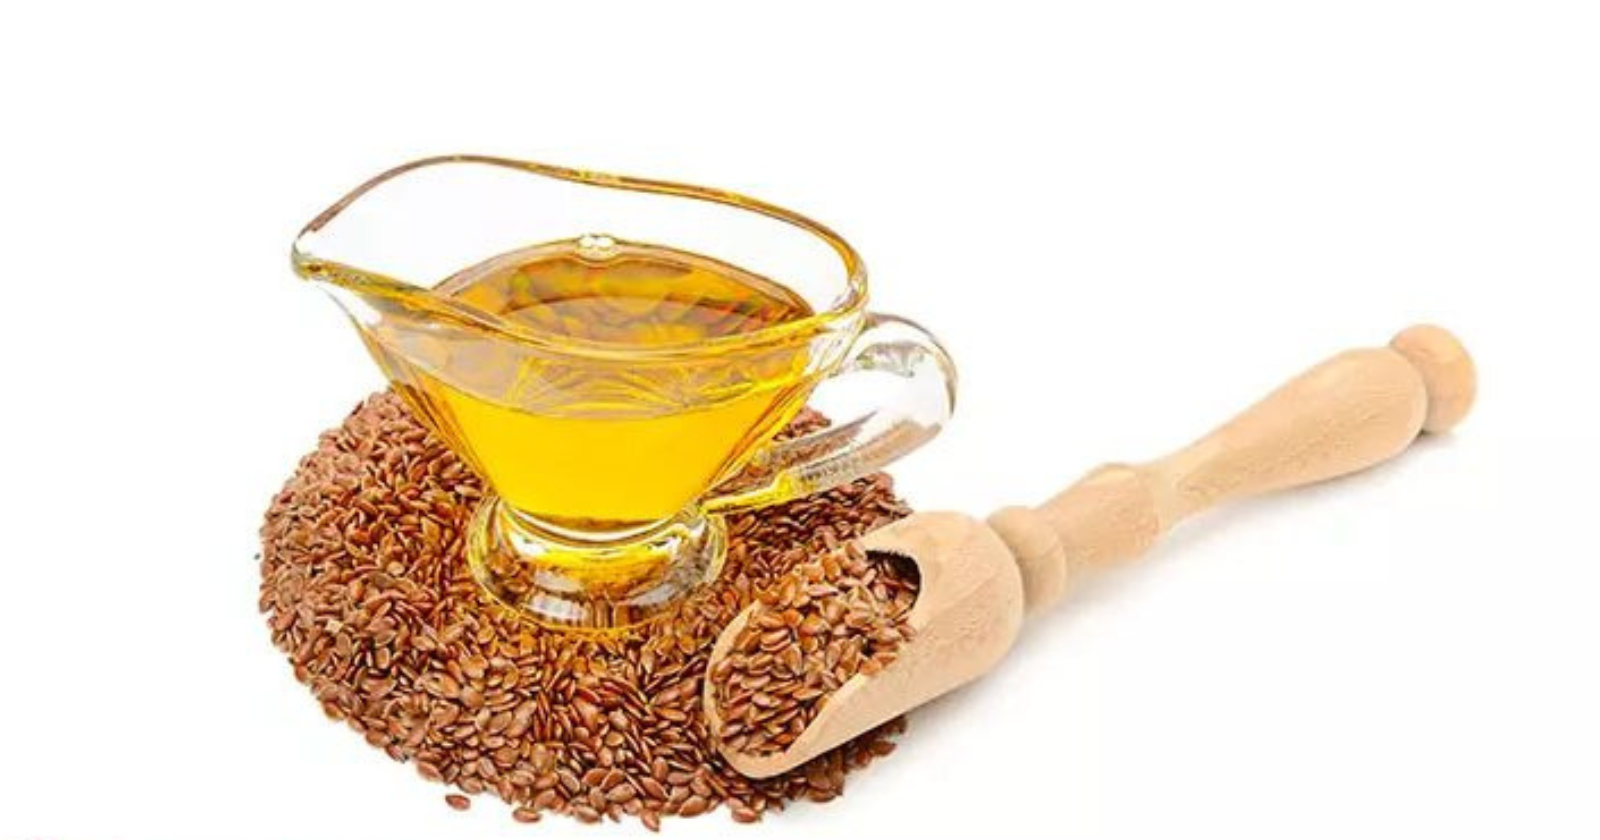 Flaxseed Oil (Ayurvedic Medicine): Uses, side effects, and more